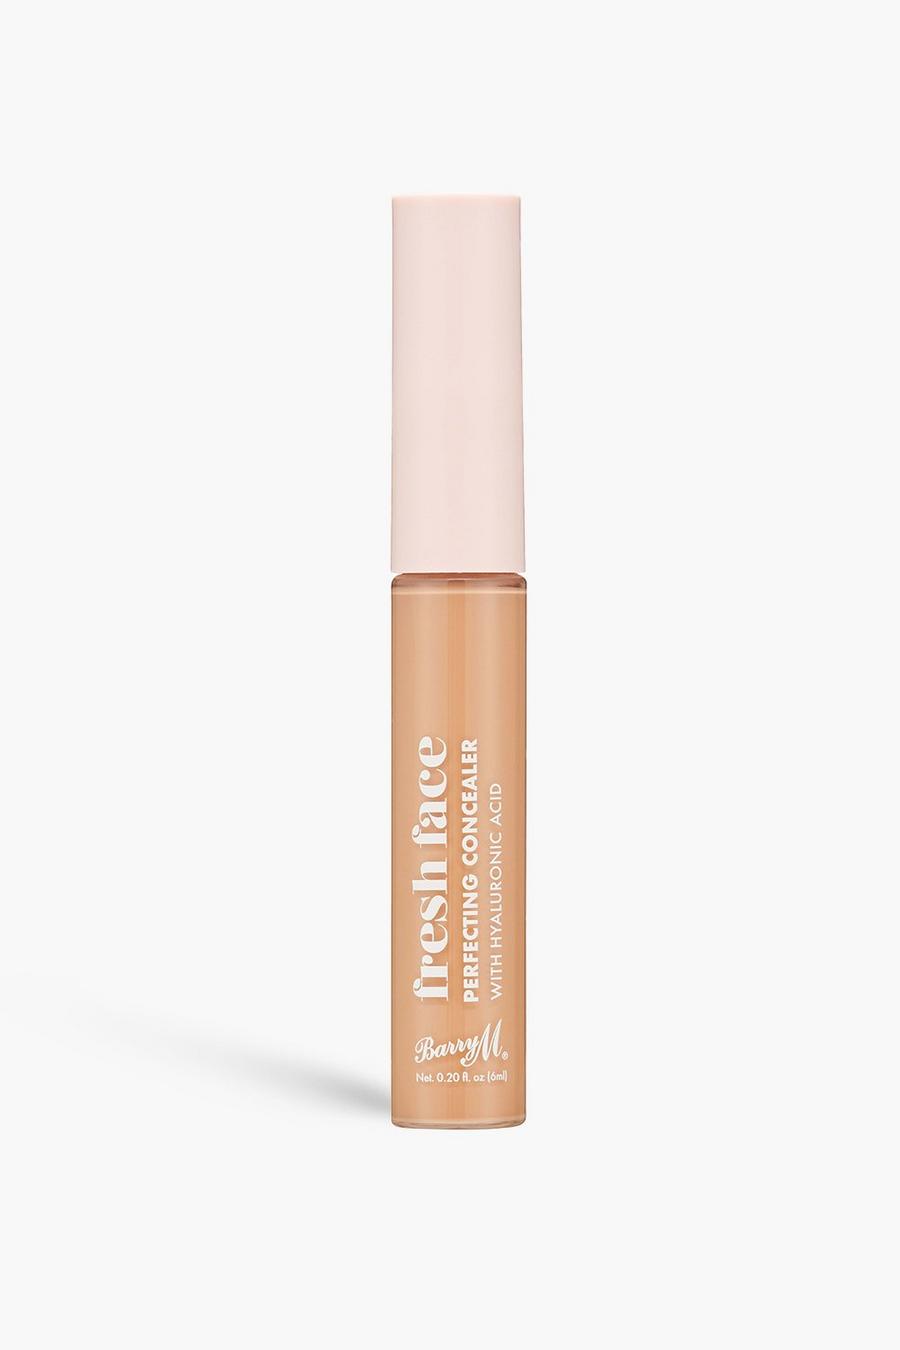 Tan marrone Fresh Face Perfecting Concealer – קונסילר 5 של Barry M